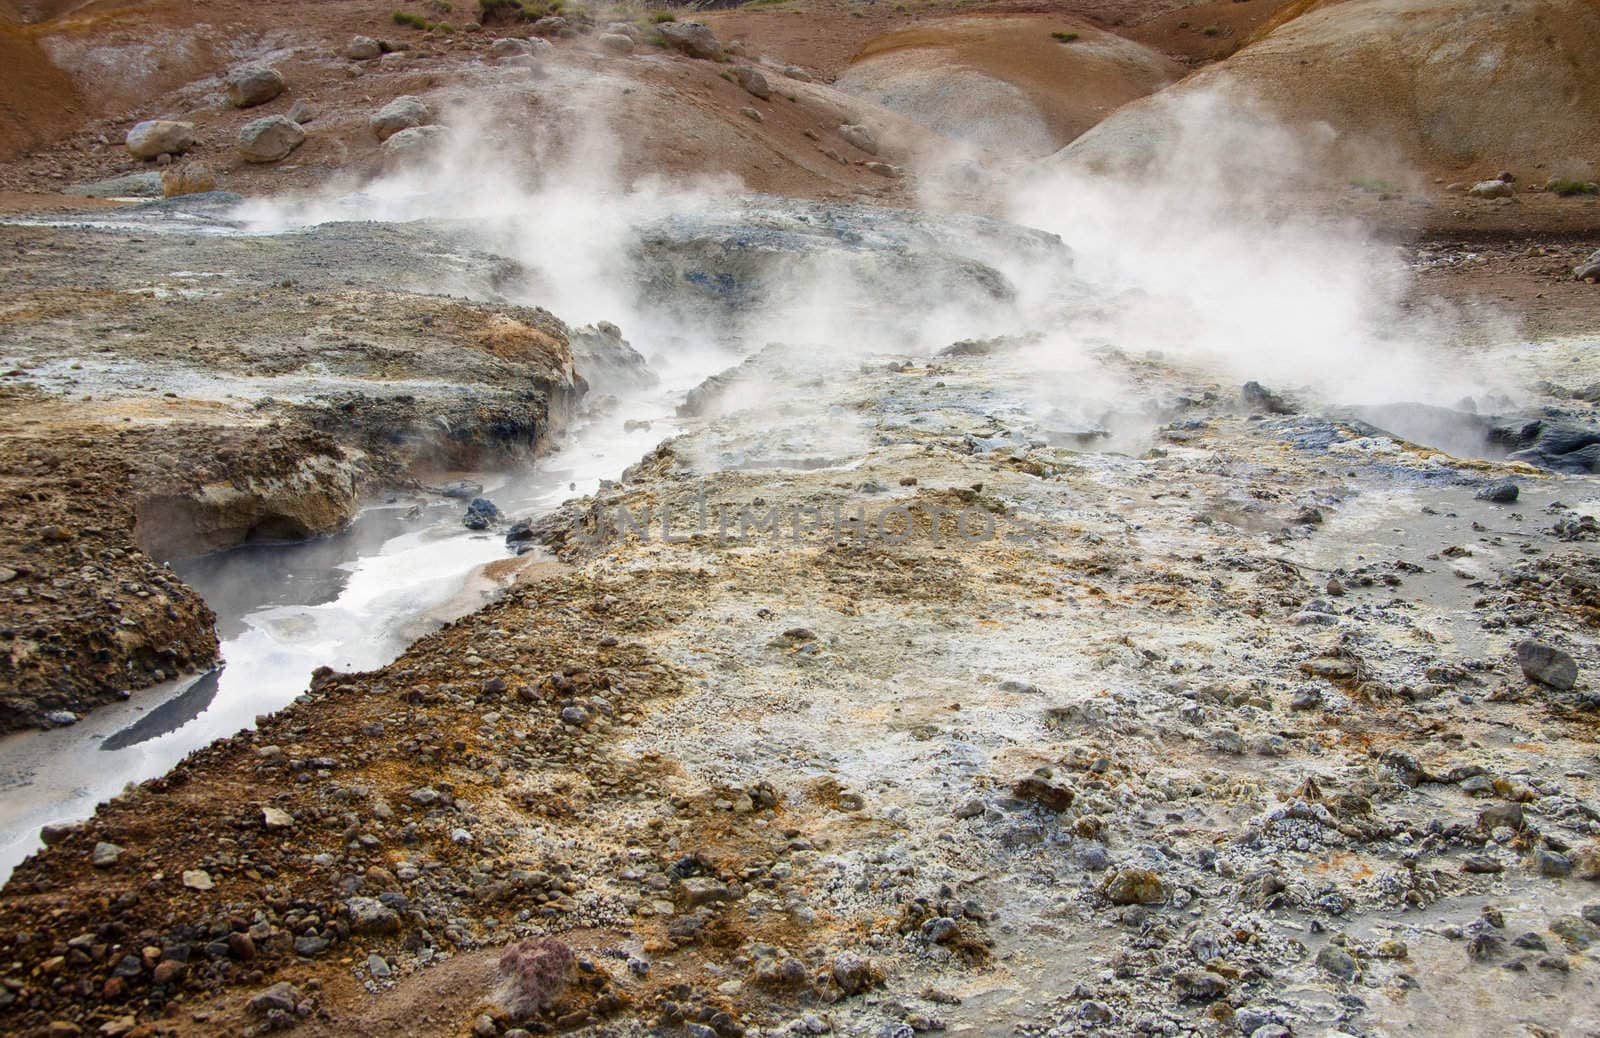 Hot springs on geothermal area in Iceland.